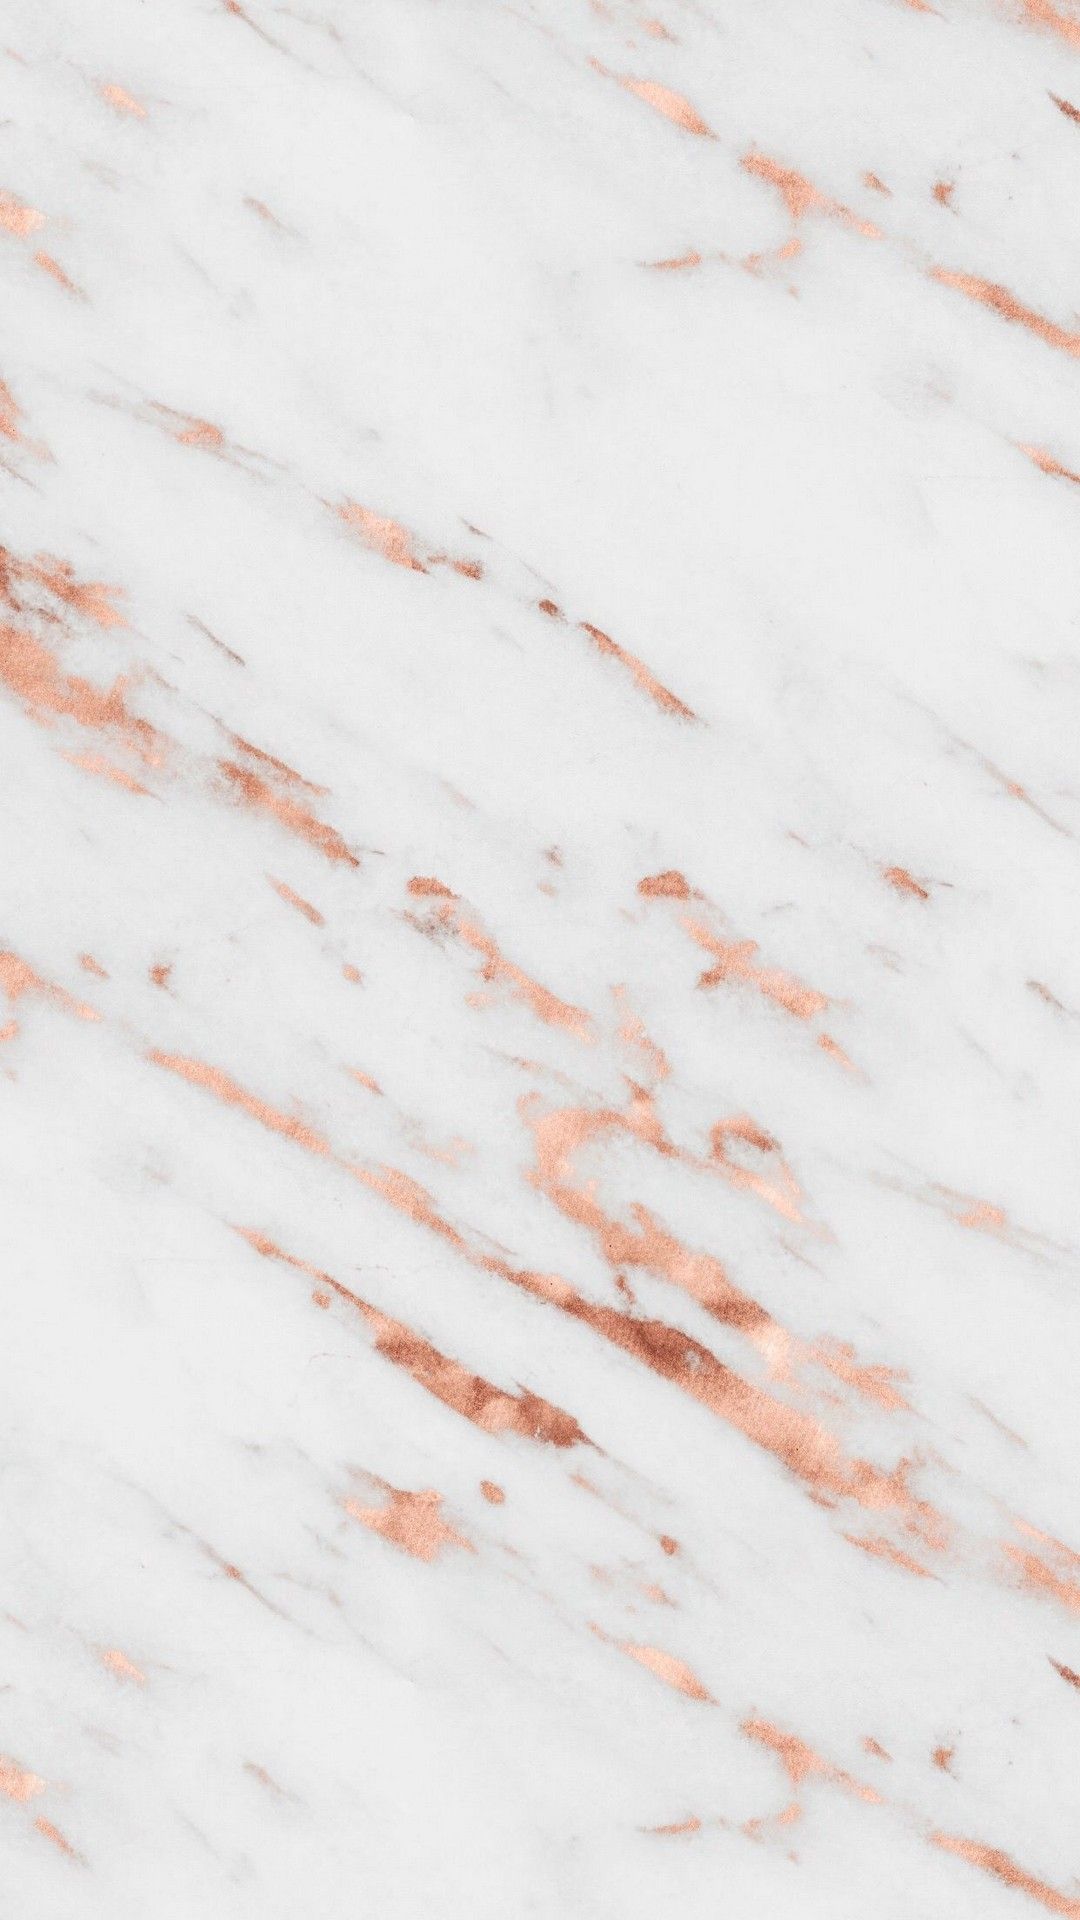 Rose Gold Marble iPhone Wallpaper Free Rose Gold Marble